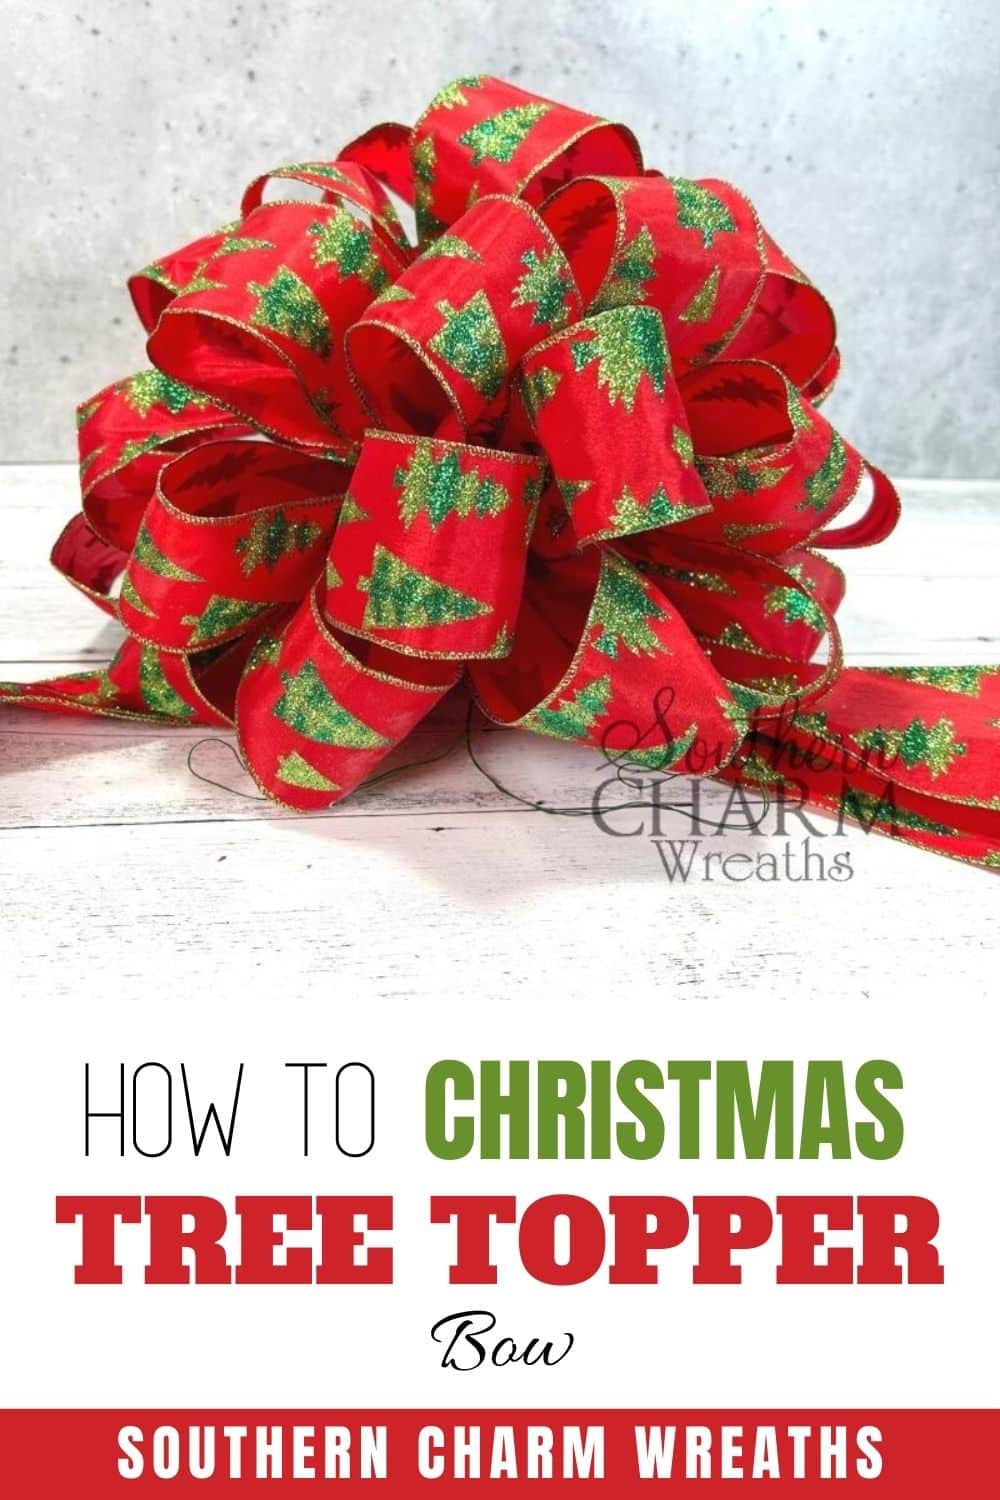 Make a Traditional Christmas Tree Topper Bow - Southern Charm Wreaths